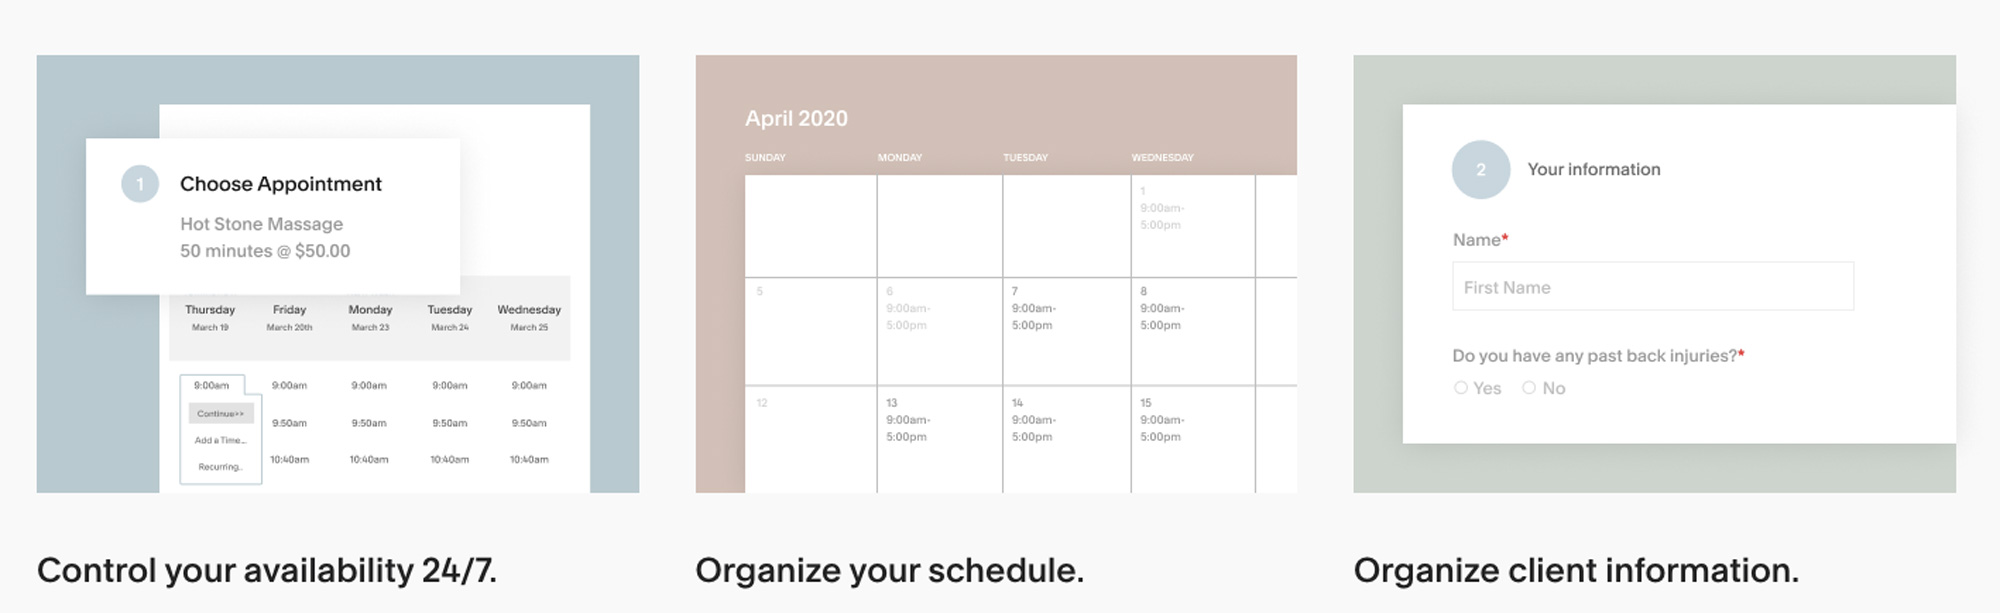 photo management tool Squarespace Scheduling